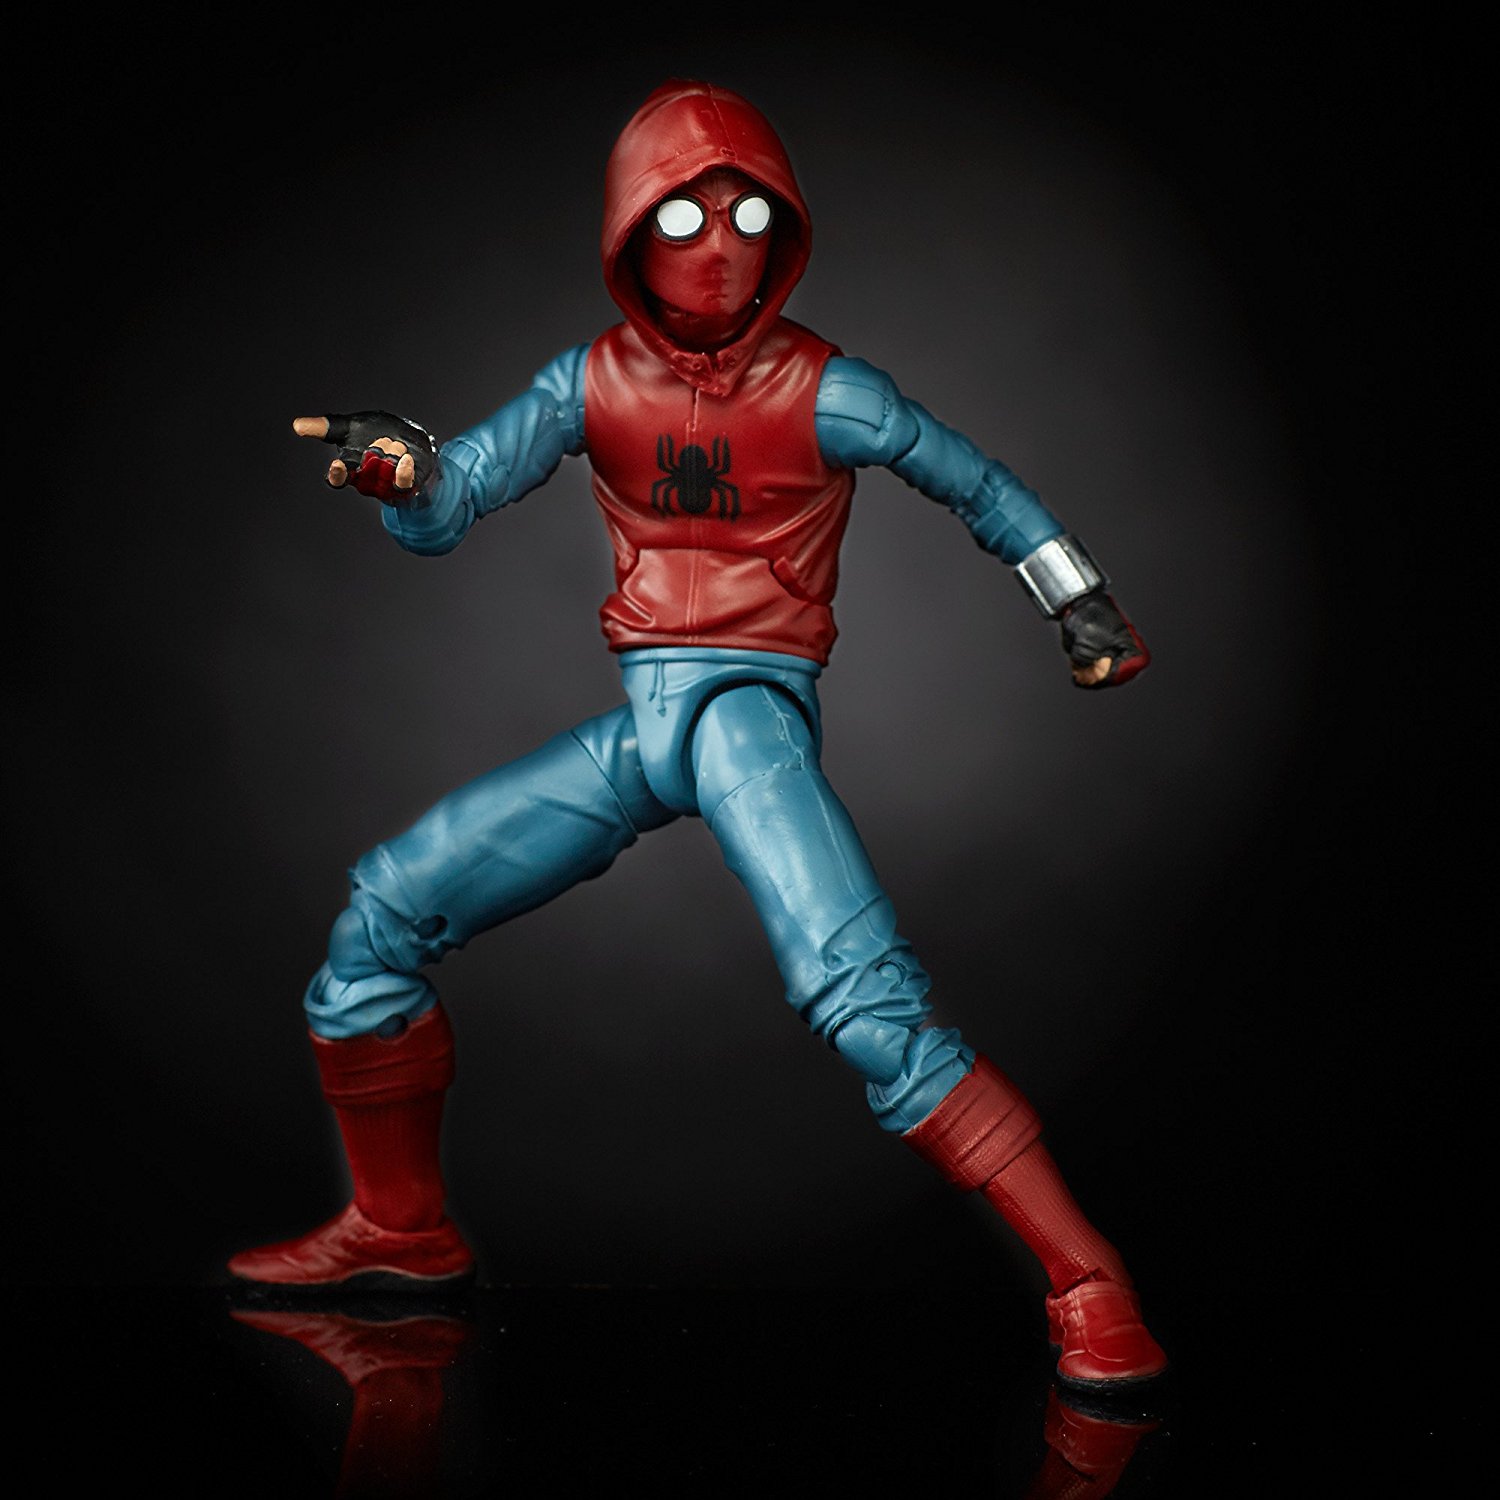 Unboxing/Review: Marvel Legends The Amazing Spider-Man 2 Infinite Series Homecoming Spiderman 2 Action Figure